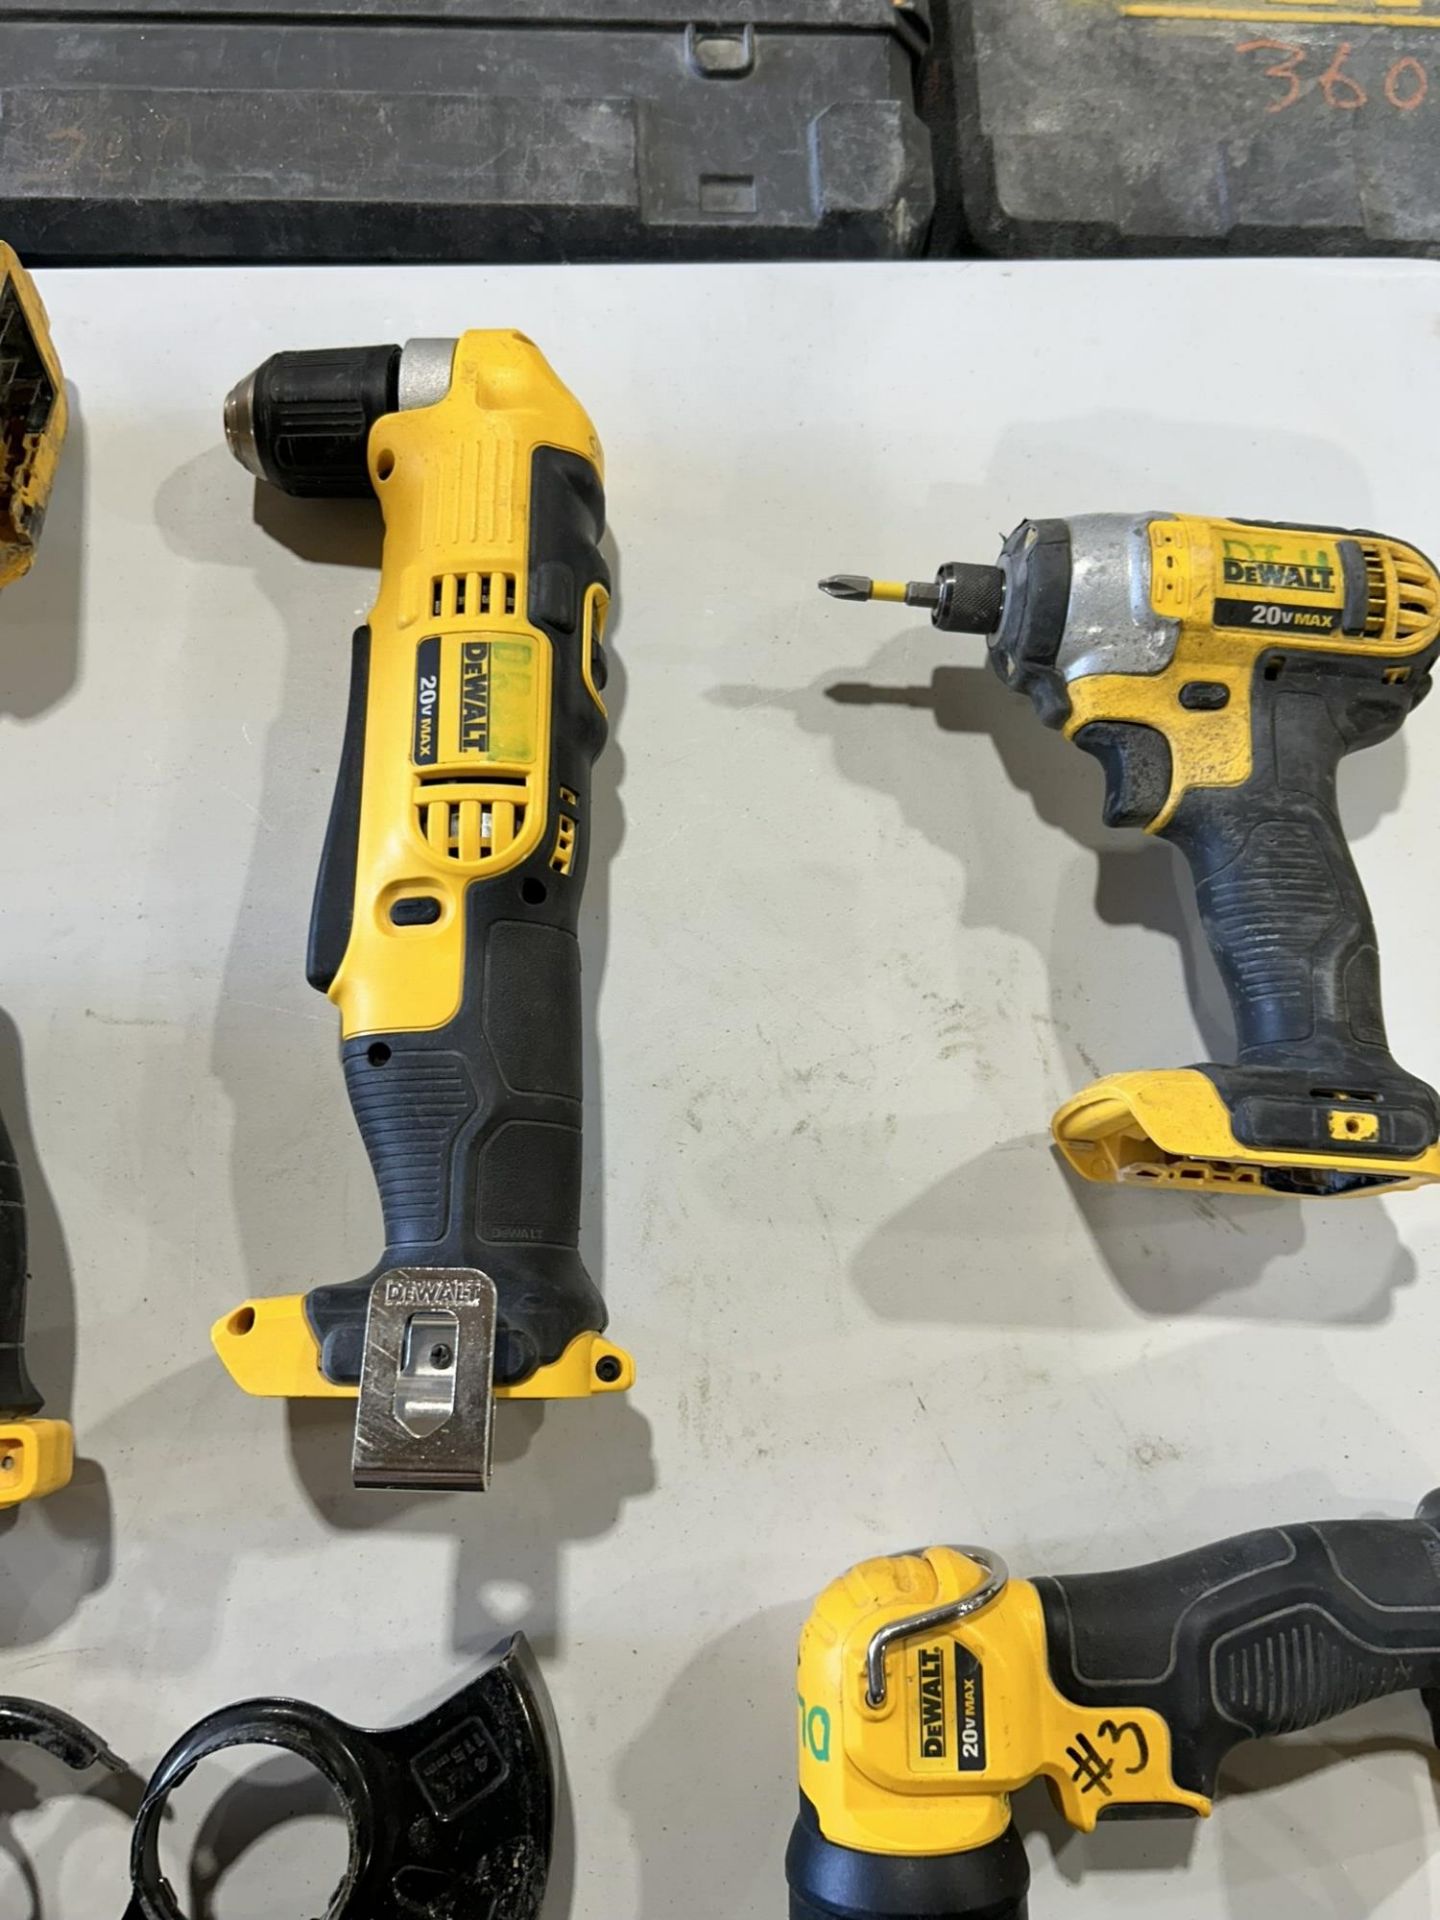 DEWALT CORDLESS RIGHT ANGLE DRILL , RECIPROCATING SAW, ANGLE GRINDER, IMPACT DRIVER, & LIGHT W/ - Image 3 of 11